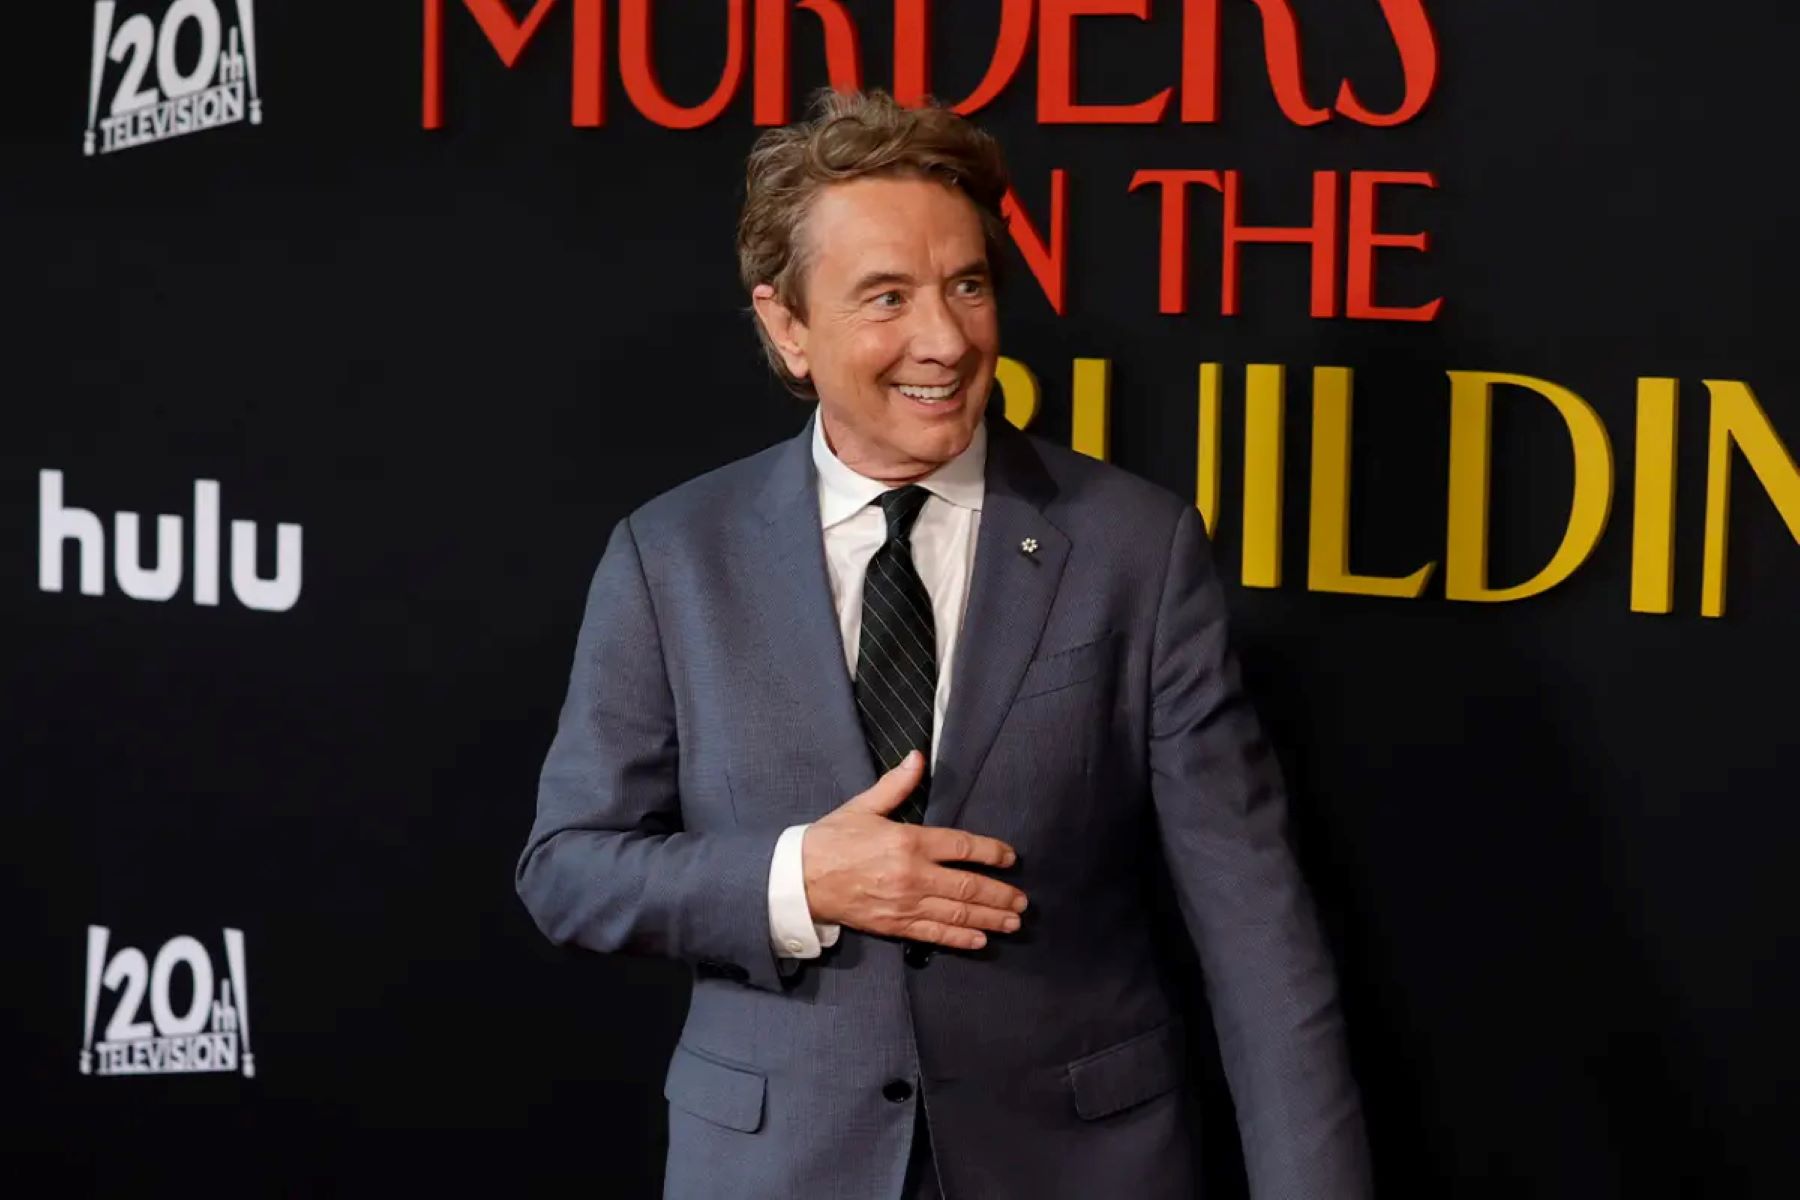 martin-short-attacked-in-op-ed-piece-fans-rally-to-his-defense